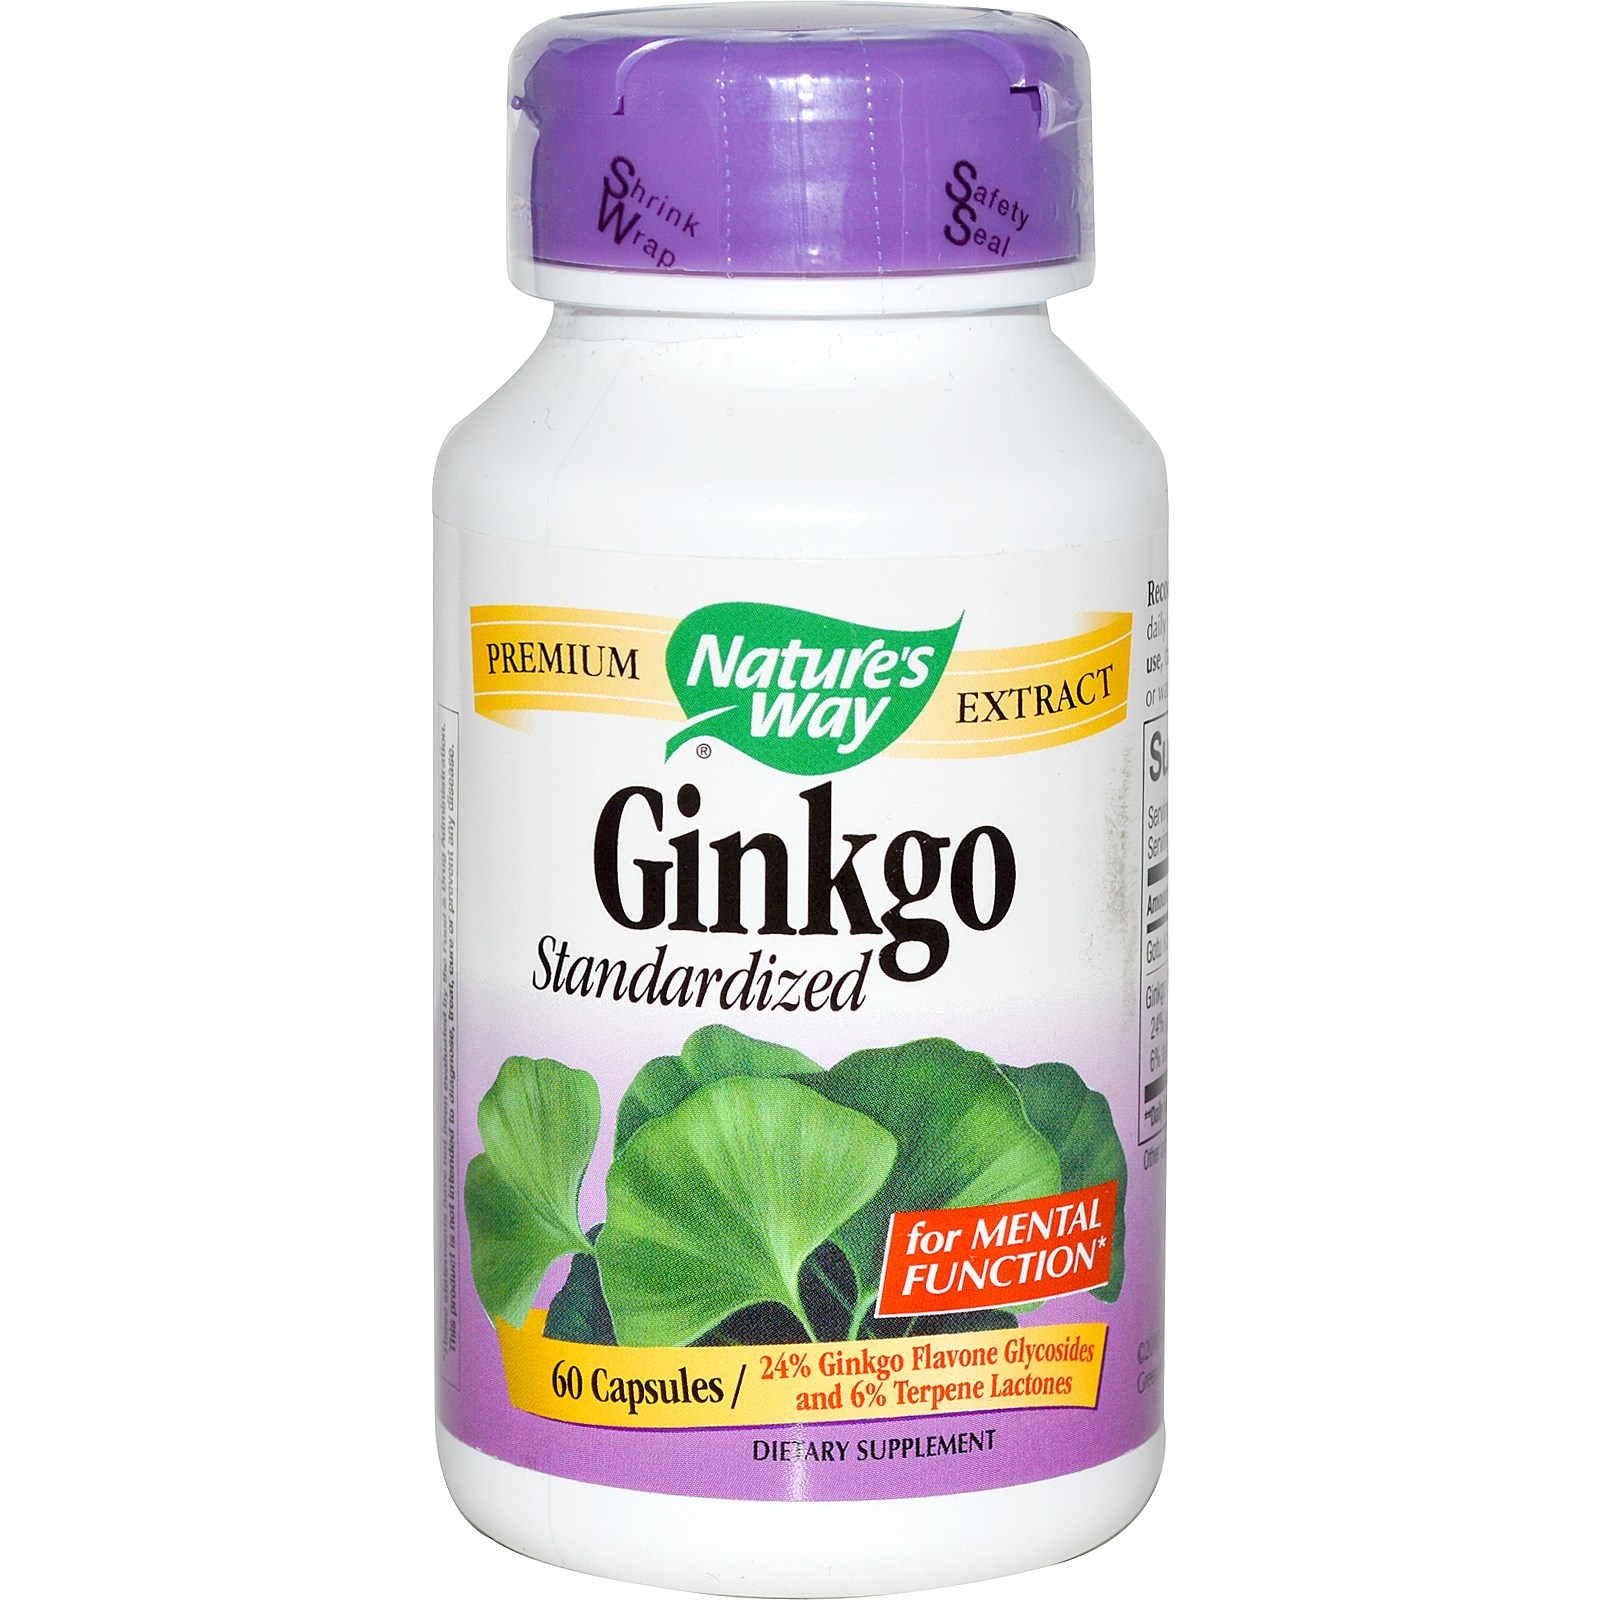 Ginkgo Biloba капсулы. Nature's answer Ginkgo капсулы 80мг. Гинкго билоба natures answer. Гинкго билоба тайские капсулы.